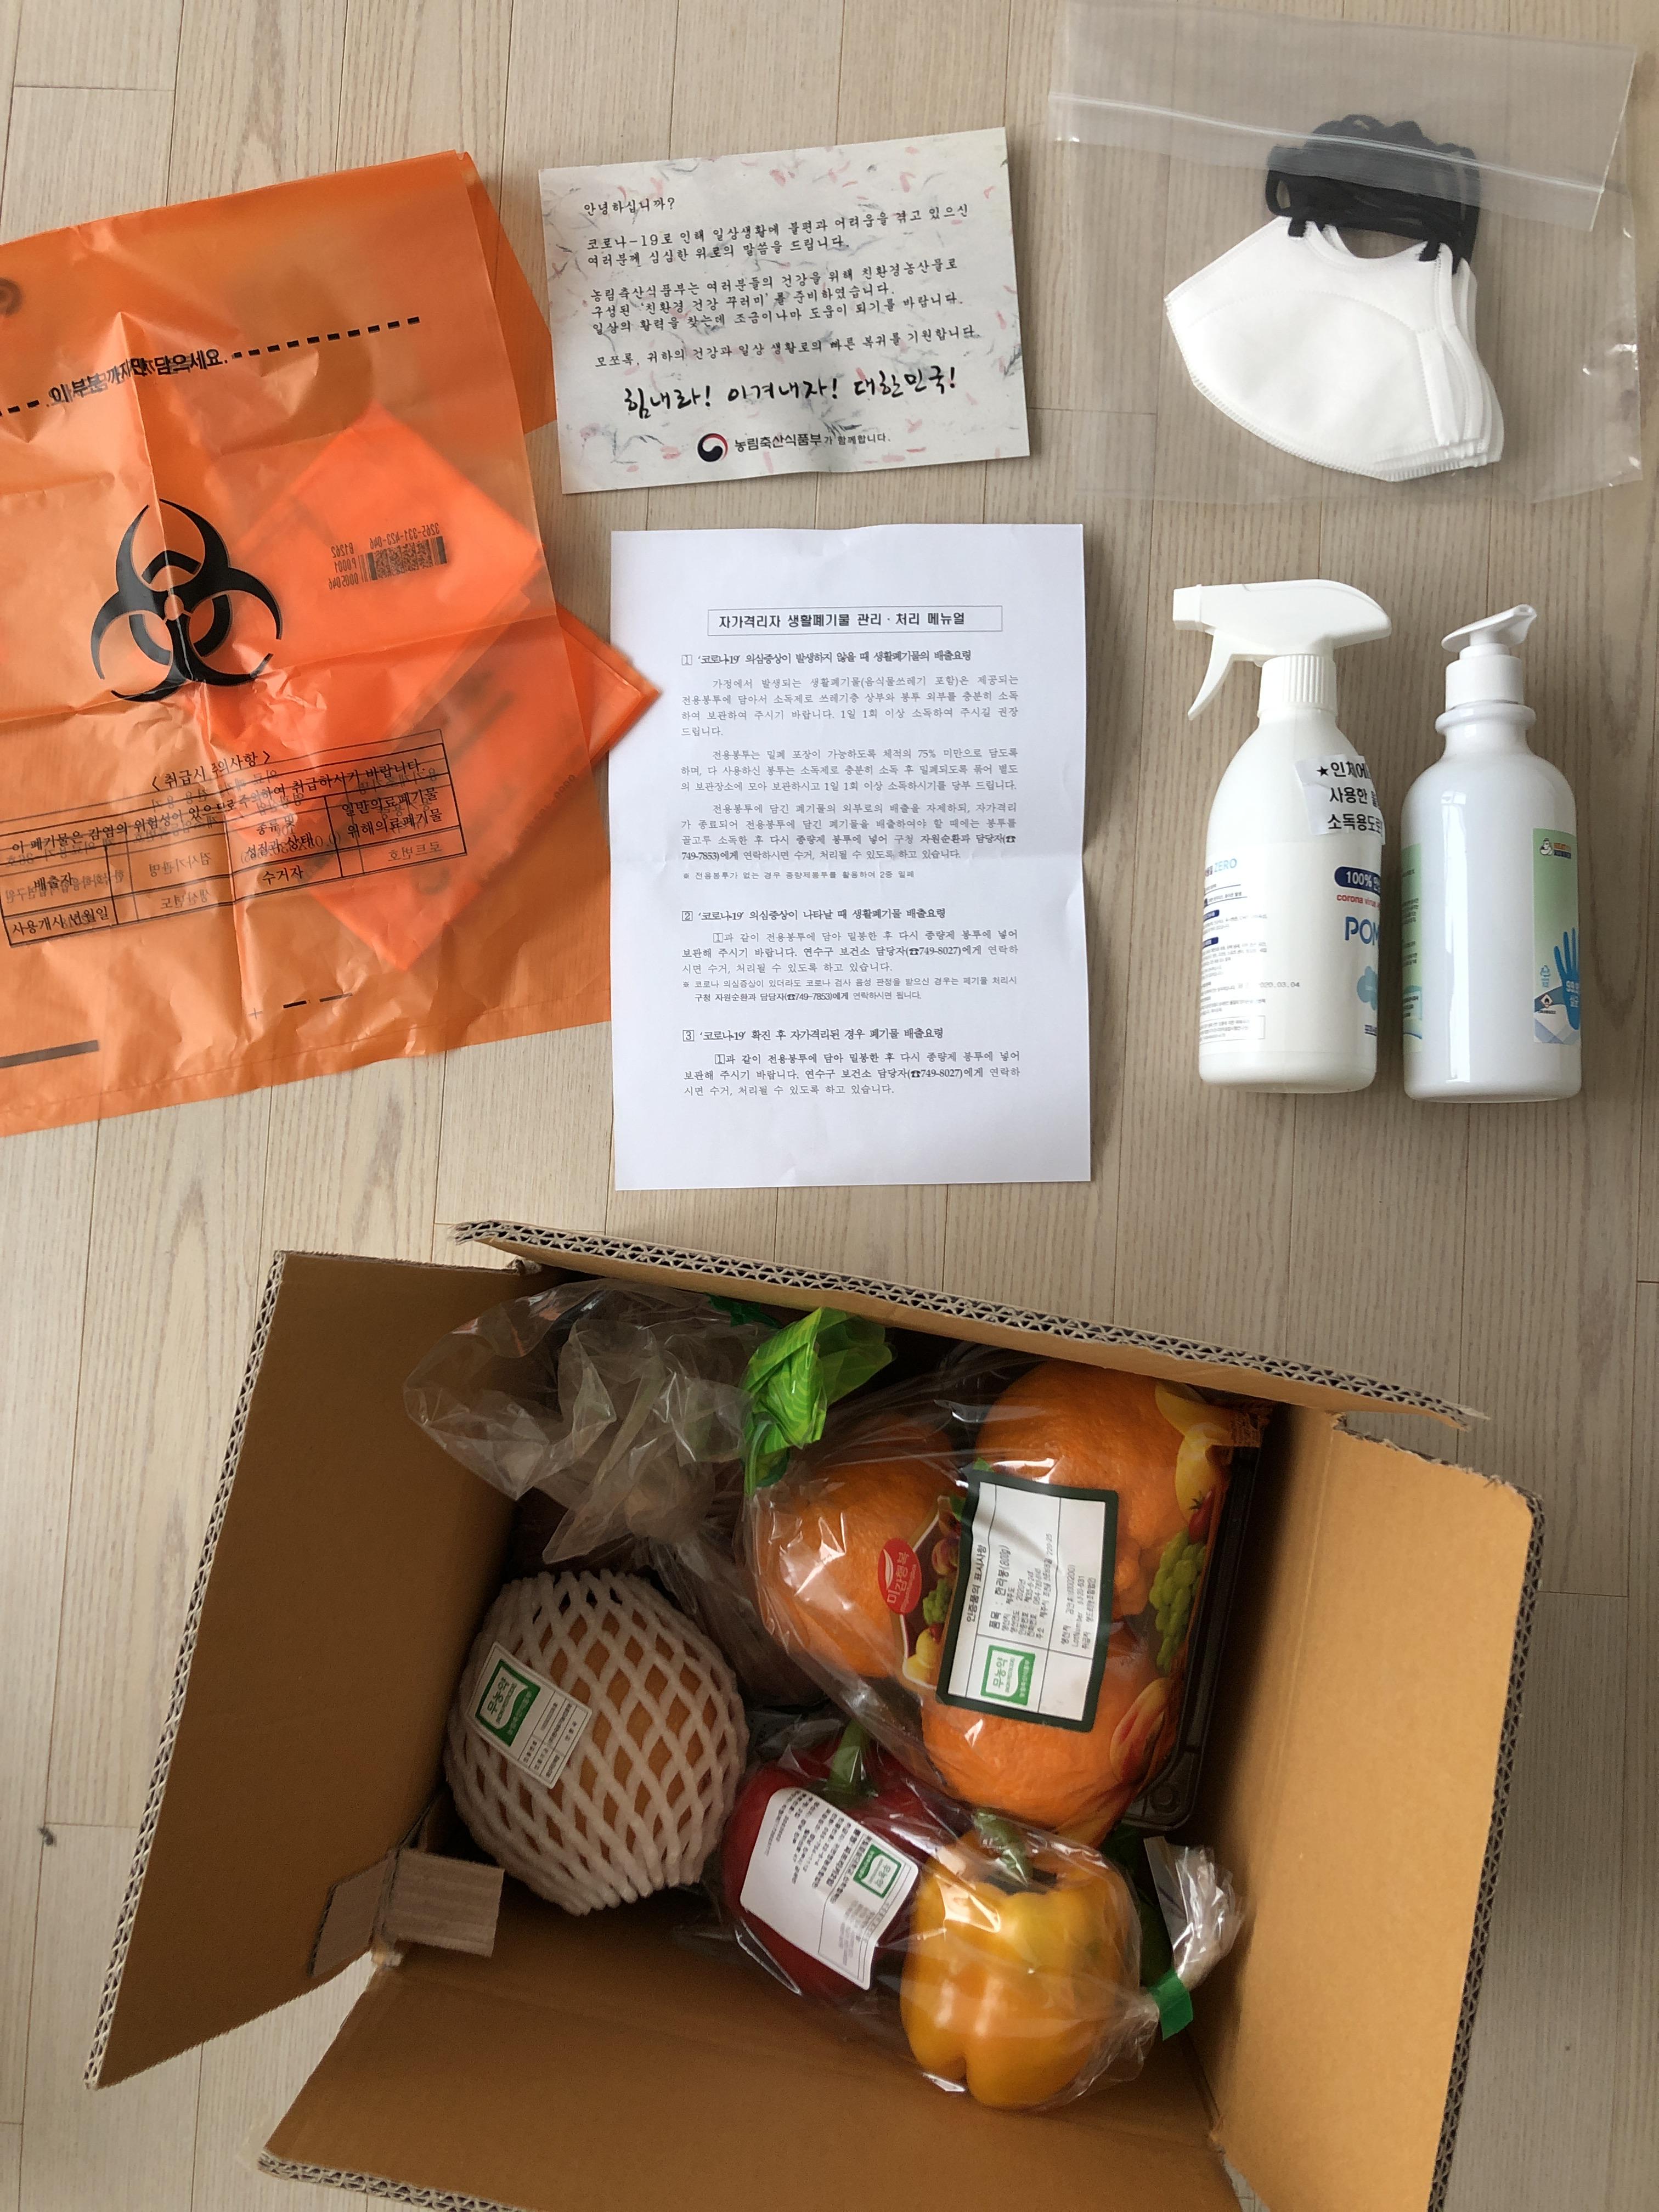 A care package the South Korean government sent to [some] quarantined citizens. 